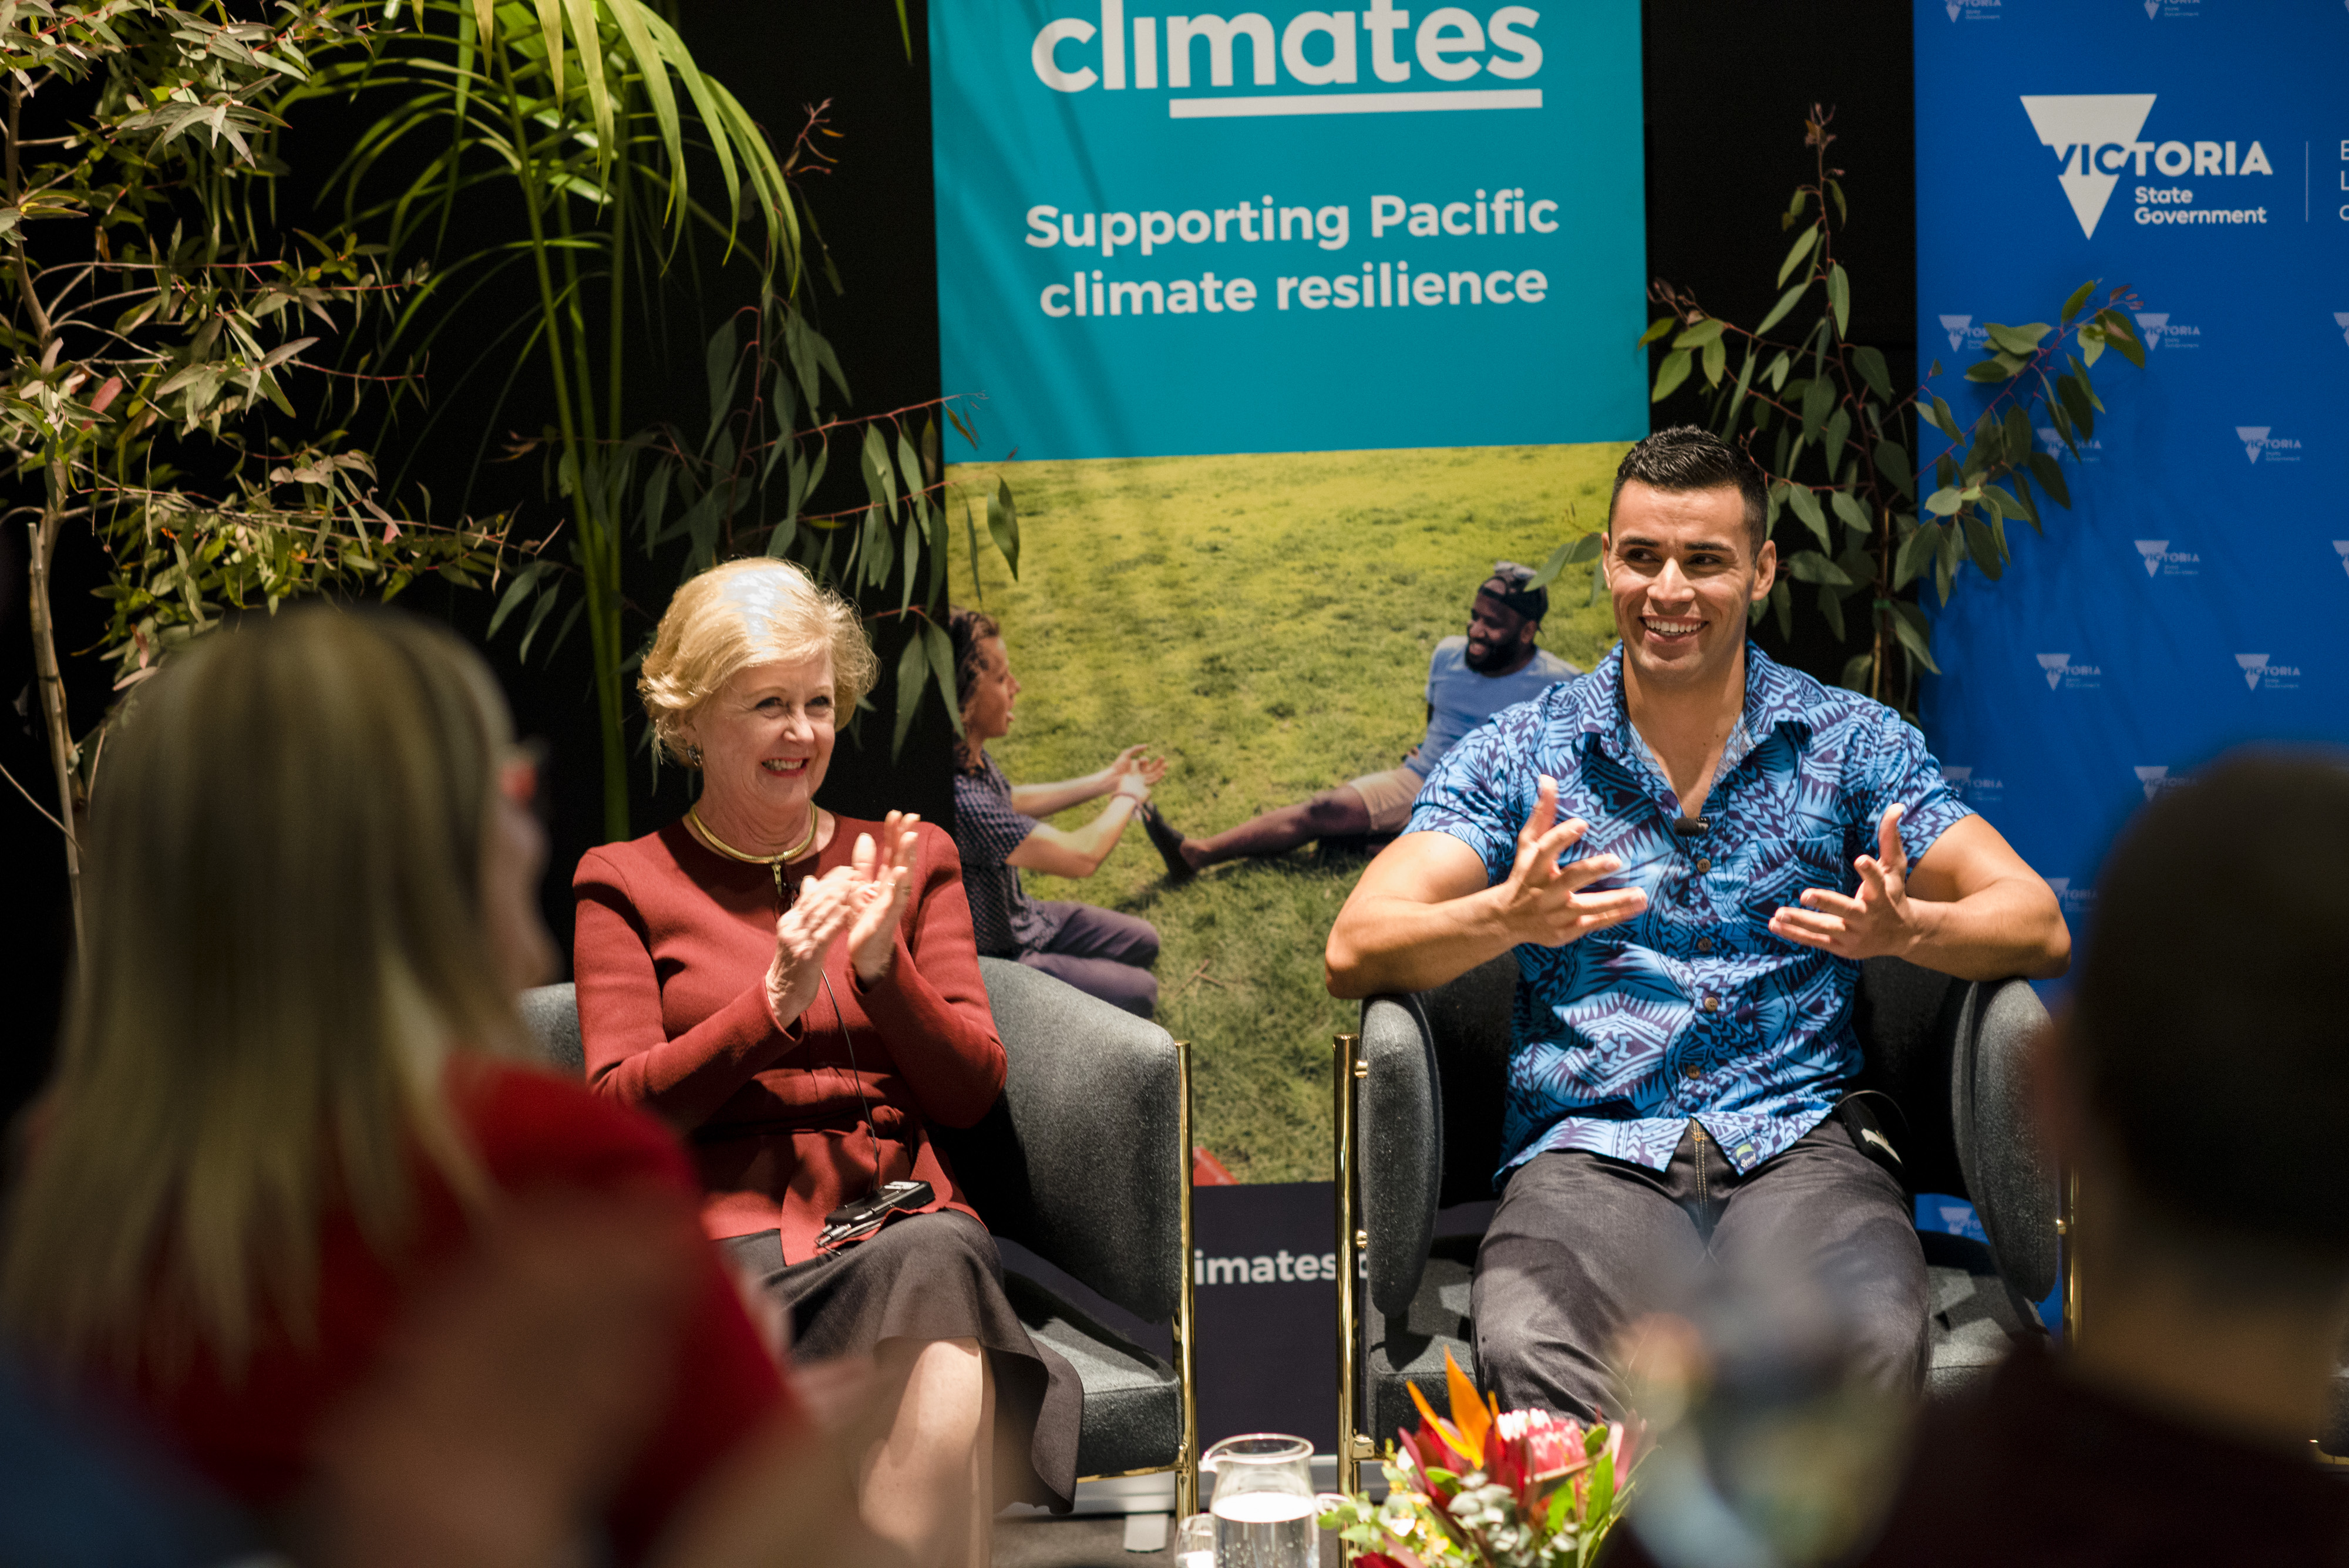 Towards climate justice: fresh perspectives in the climate discussion